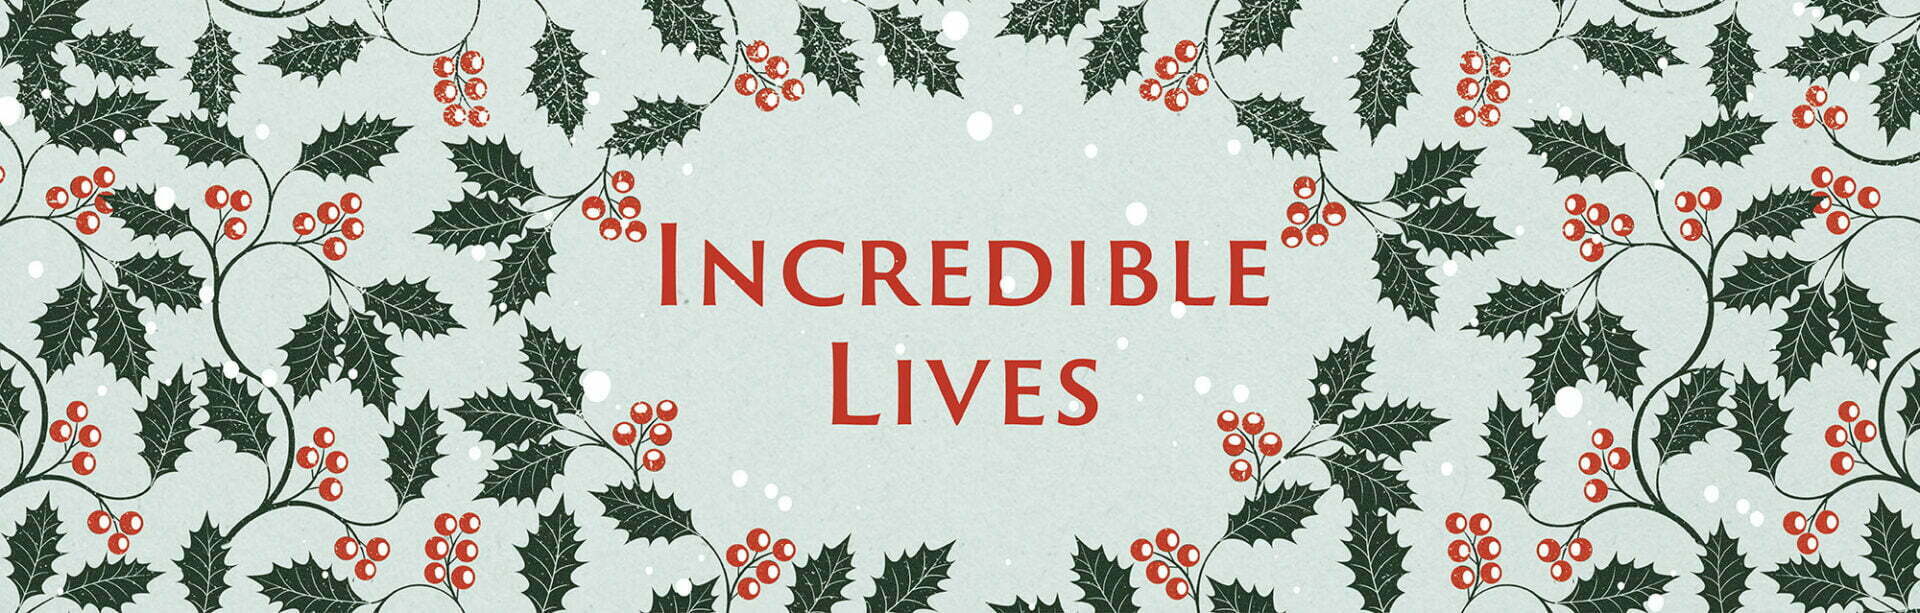 https://faber.wp.dev.diffusion.digital/wp-content/uploads/2021/11/Faber-Christmas-Gift-Guide-Incredible-Lives-1-1920x613.jpg